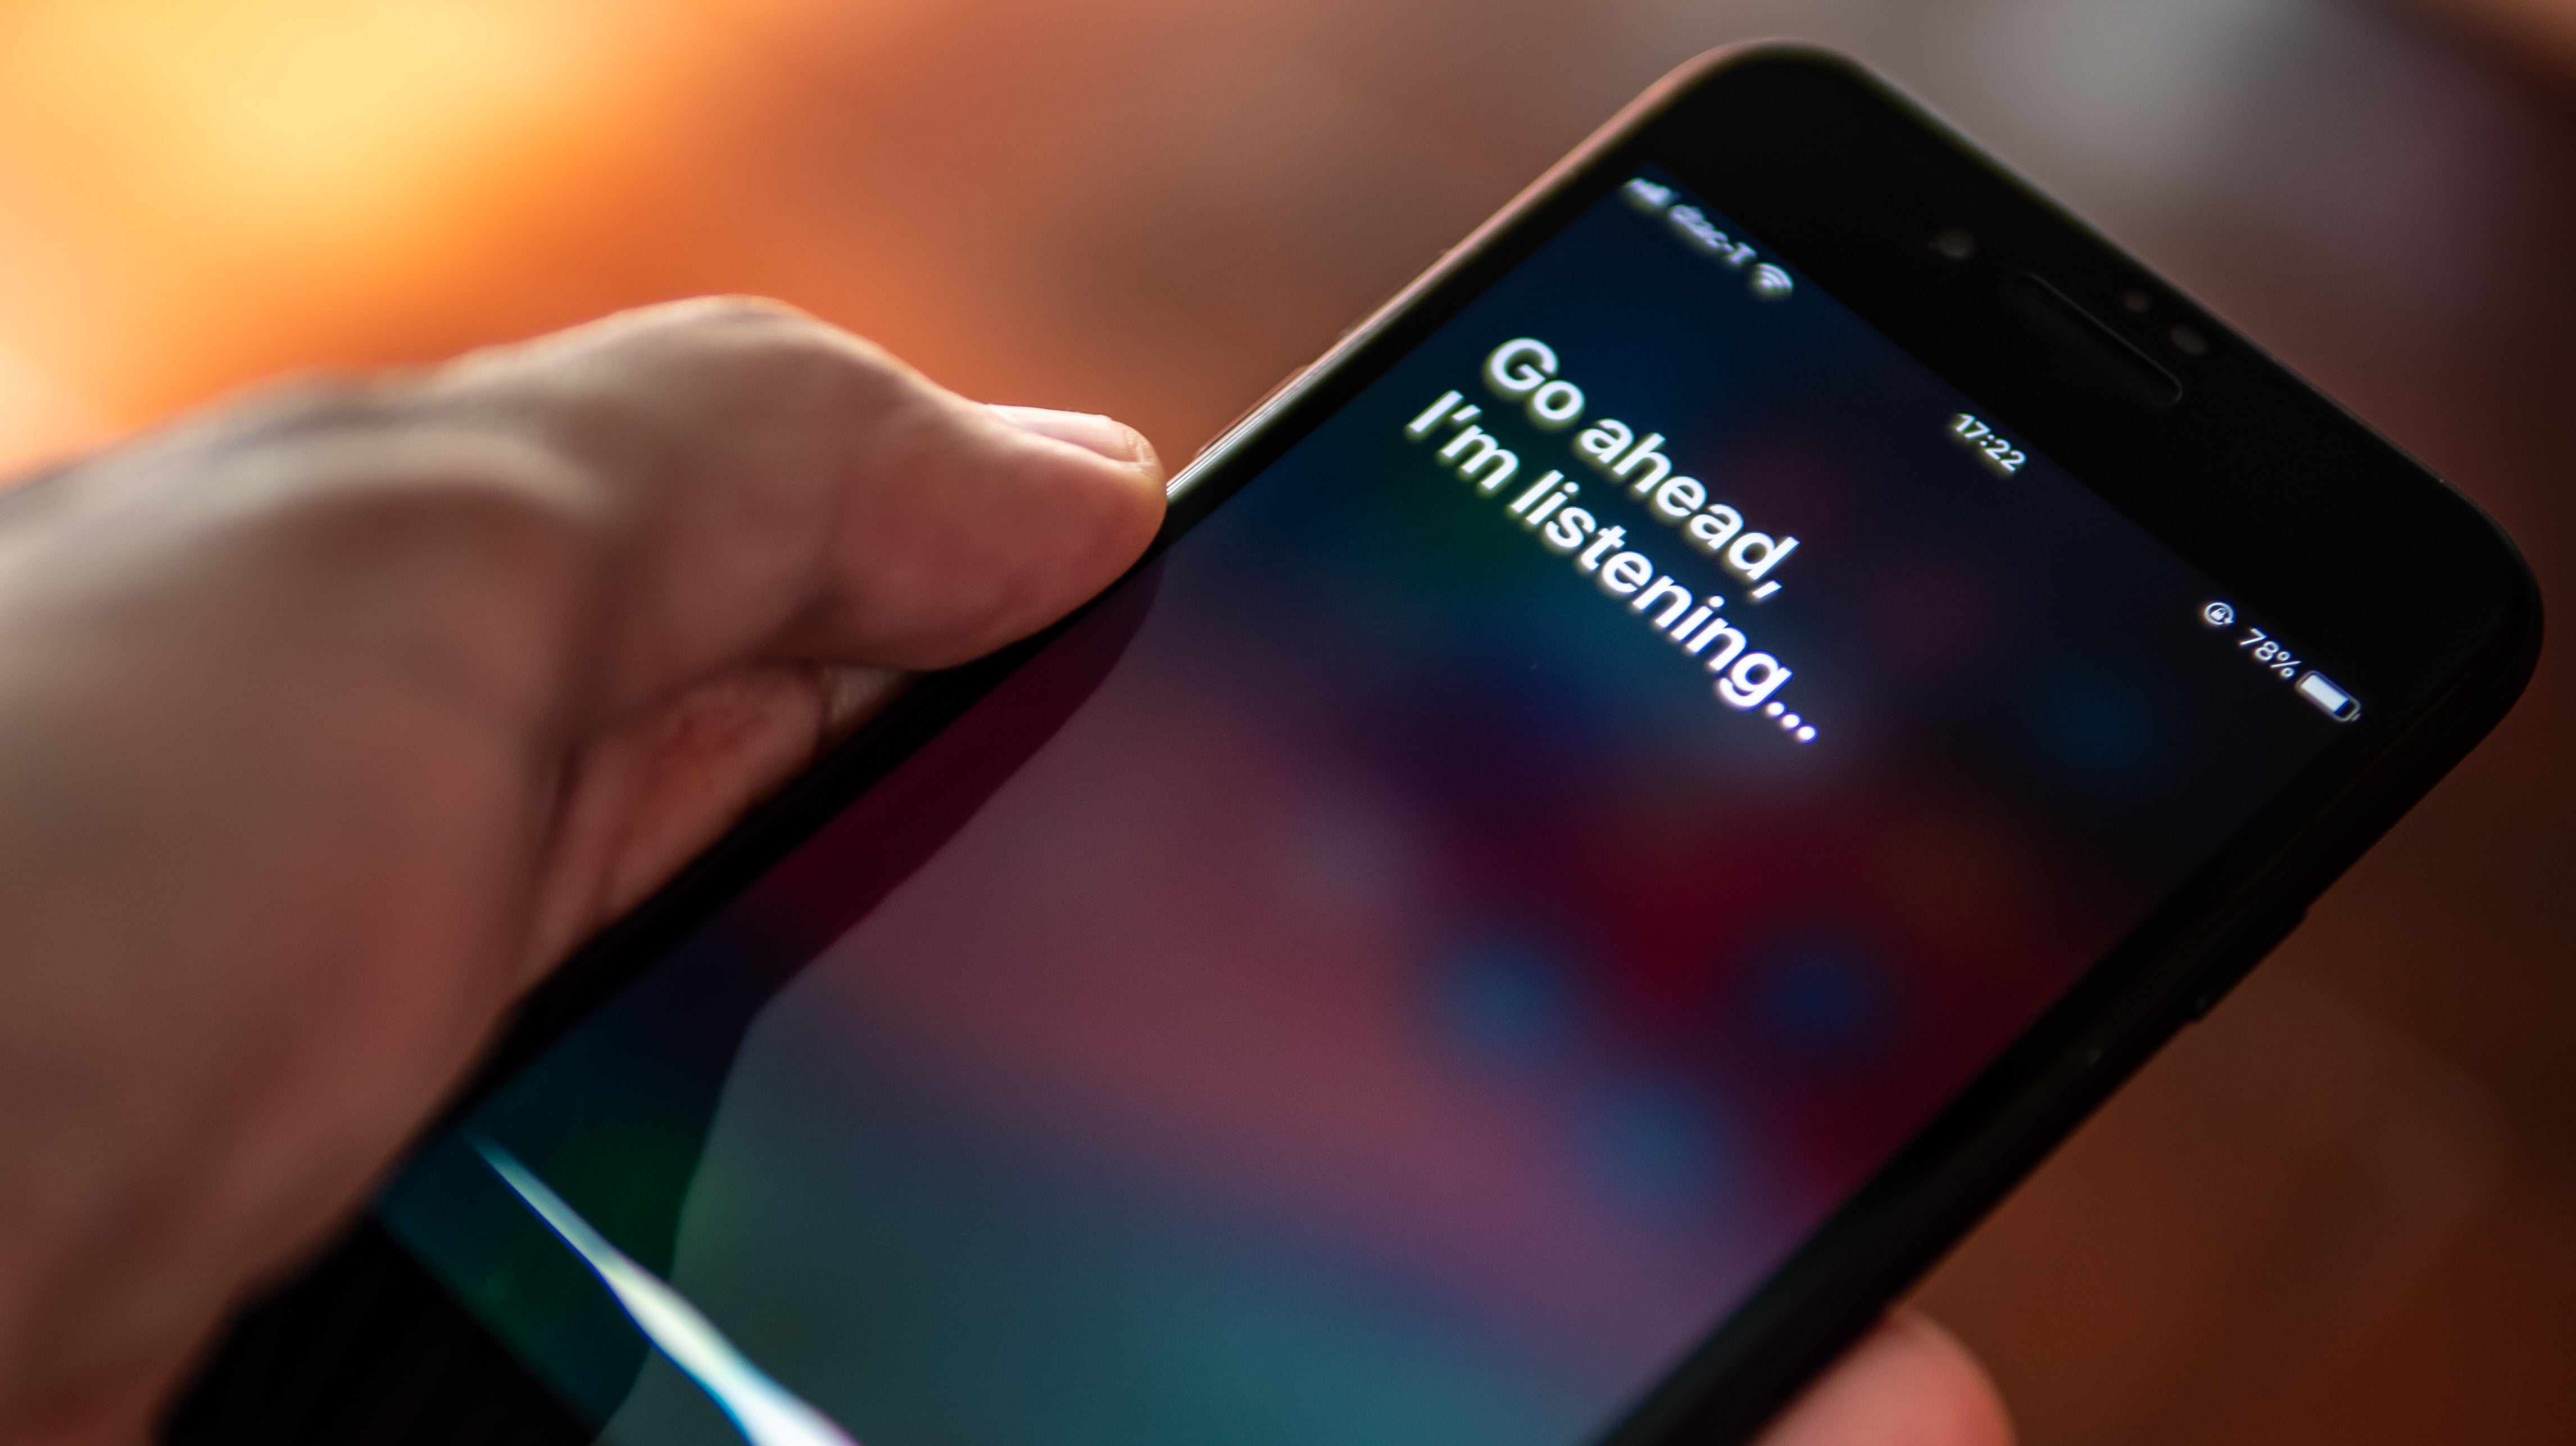 Siri Can Now Field Questions About Coronavirus